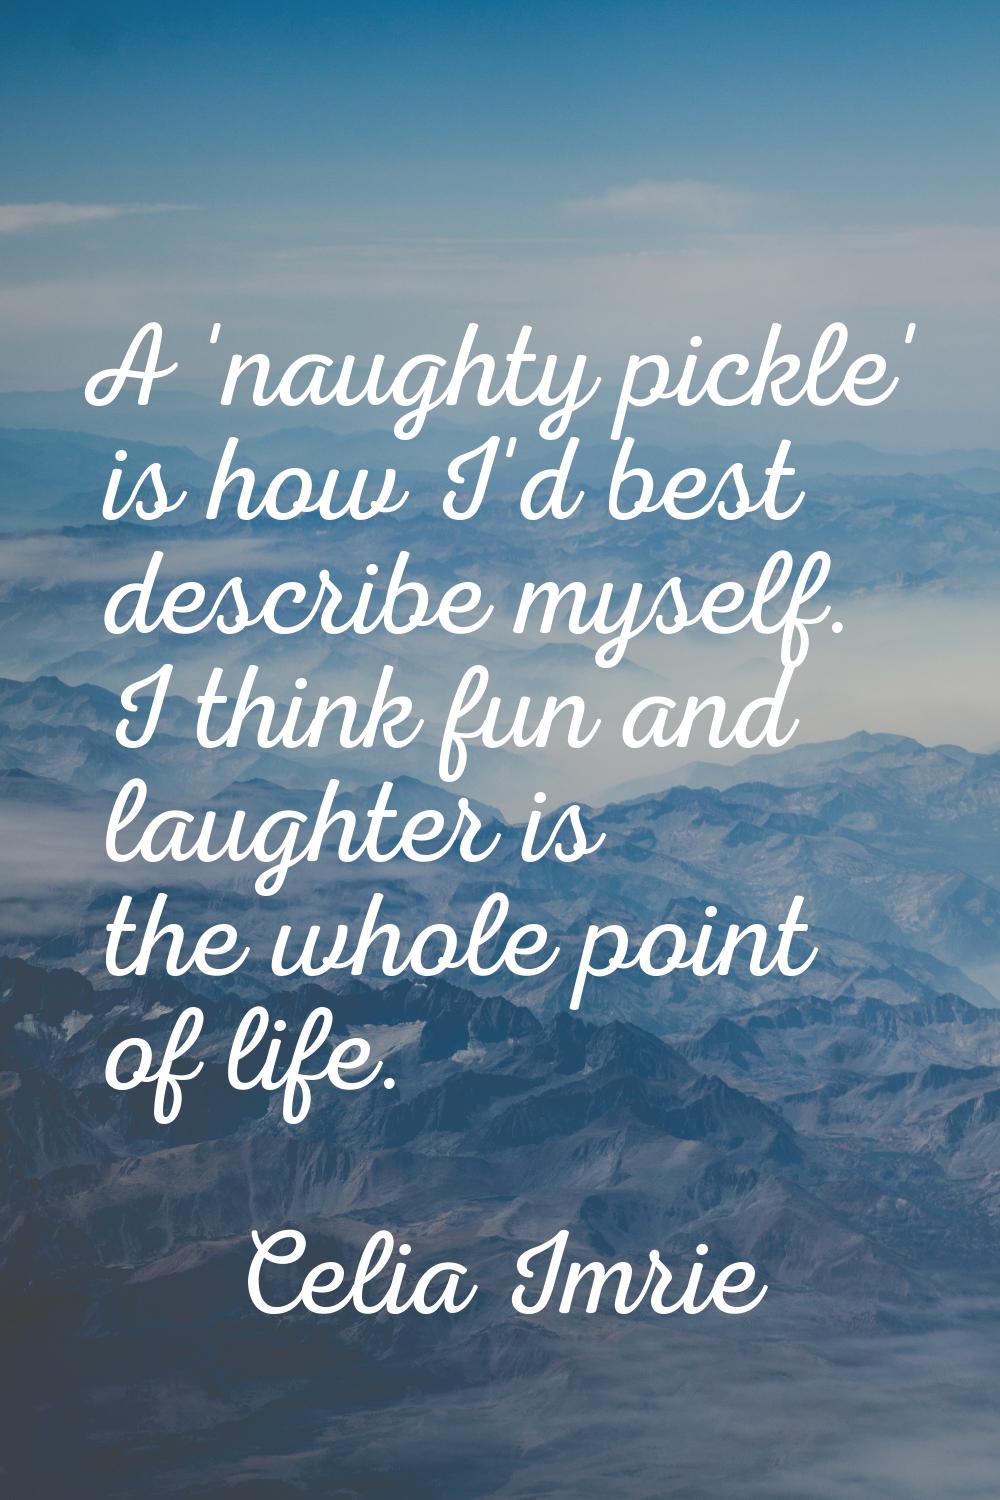 A 'naughty pickle' is how I'd best describe myself. I think fun and laughter is the whole point of 